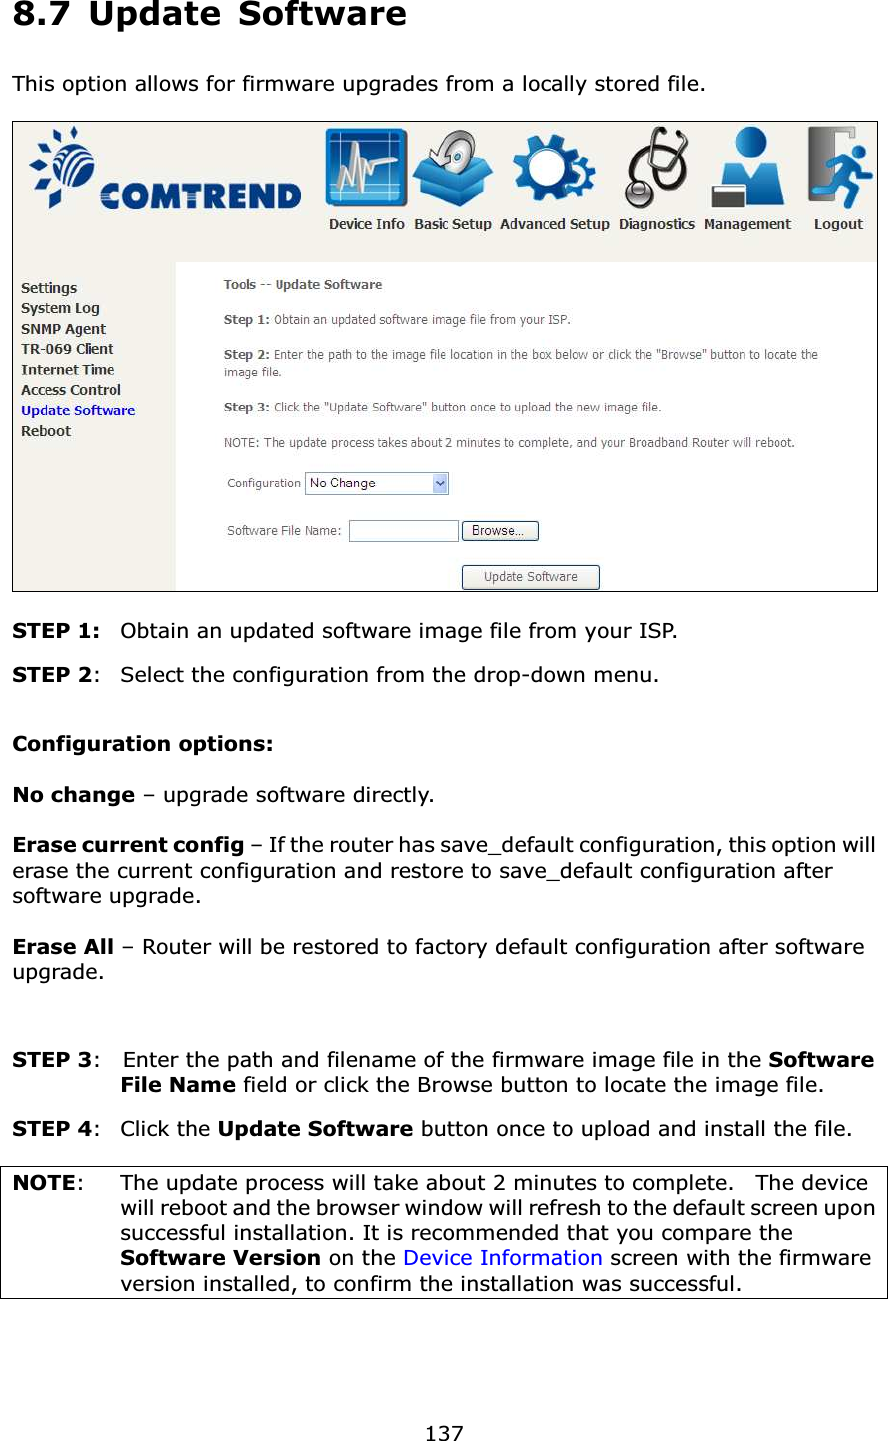  137 8.7 Update Software This option allows for firmware upgrades from a locally stored file.    STEP 1:  Obtain an updated software image file from your ISP. STEP 2:   Select the configuration from the drop-down menu.  Configuration options:    No change – upgrade software directly.  Erase current config – If the router has save_default configuration, this option will erase the current configuration and restore to save_default configuration after software upgrade.  Erase All – Router will be restored to factory default configuration after software upgrade.  STEP 3:    Enter the path and filename of the firmware image file in the Software File Name field or click the Browse button to locate the image file. STEP 4:  Click the Update Software button once to upload and install the file.  NOTE:    The update process will take about 2 minutes to complete.    The device will reboot and the browser window will refresh to the default screen upon successful installation. It is recommended that you compare the Software Version on the Device Information screen with the firmware version installed, to confirm the installation was successful.     